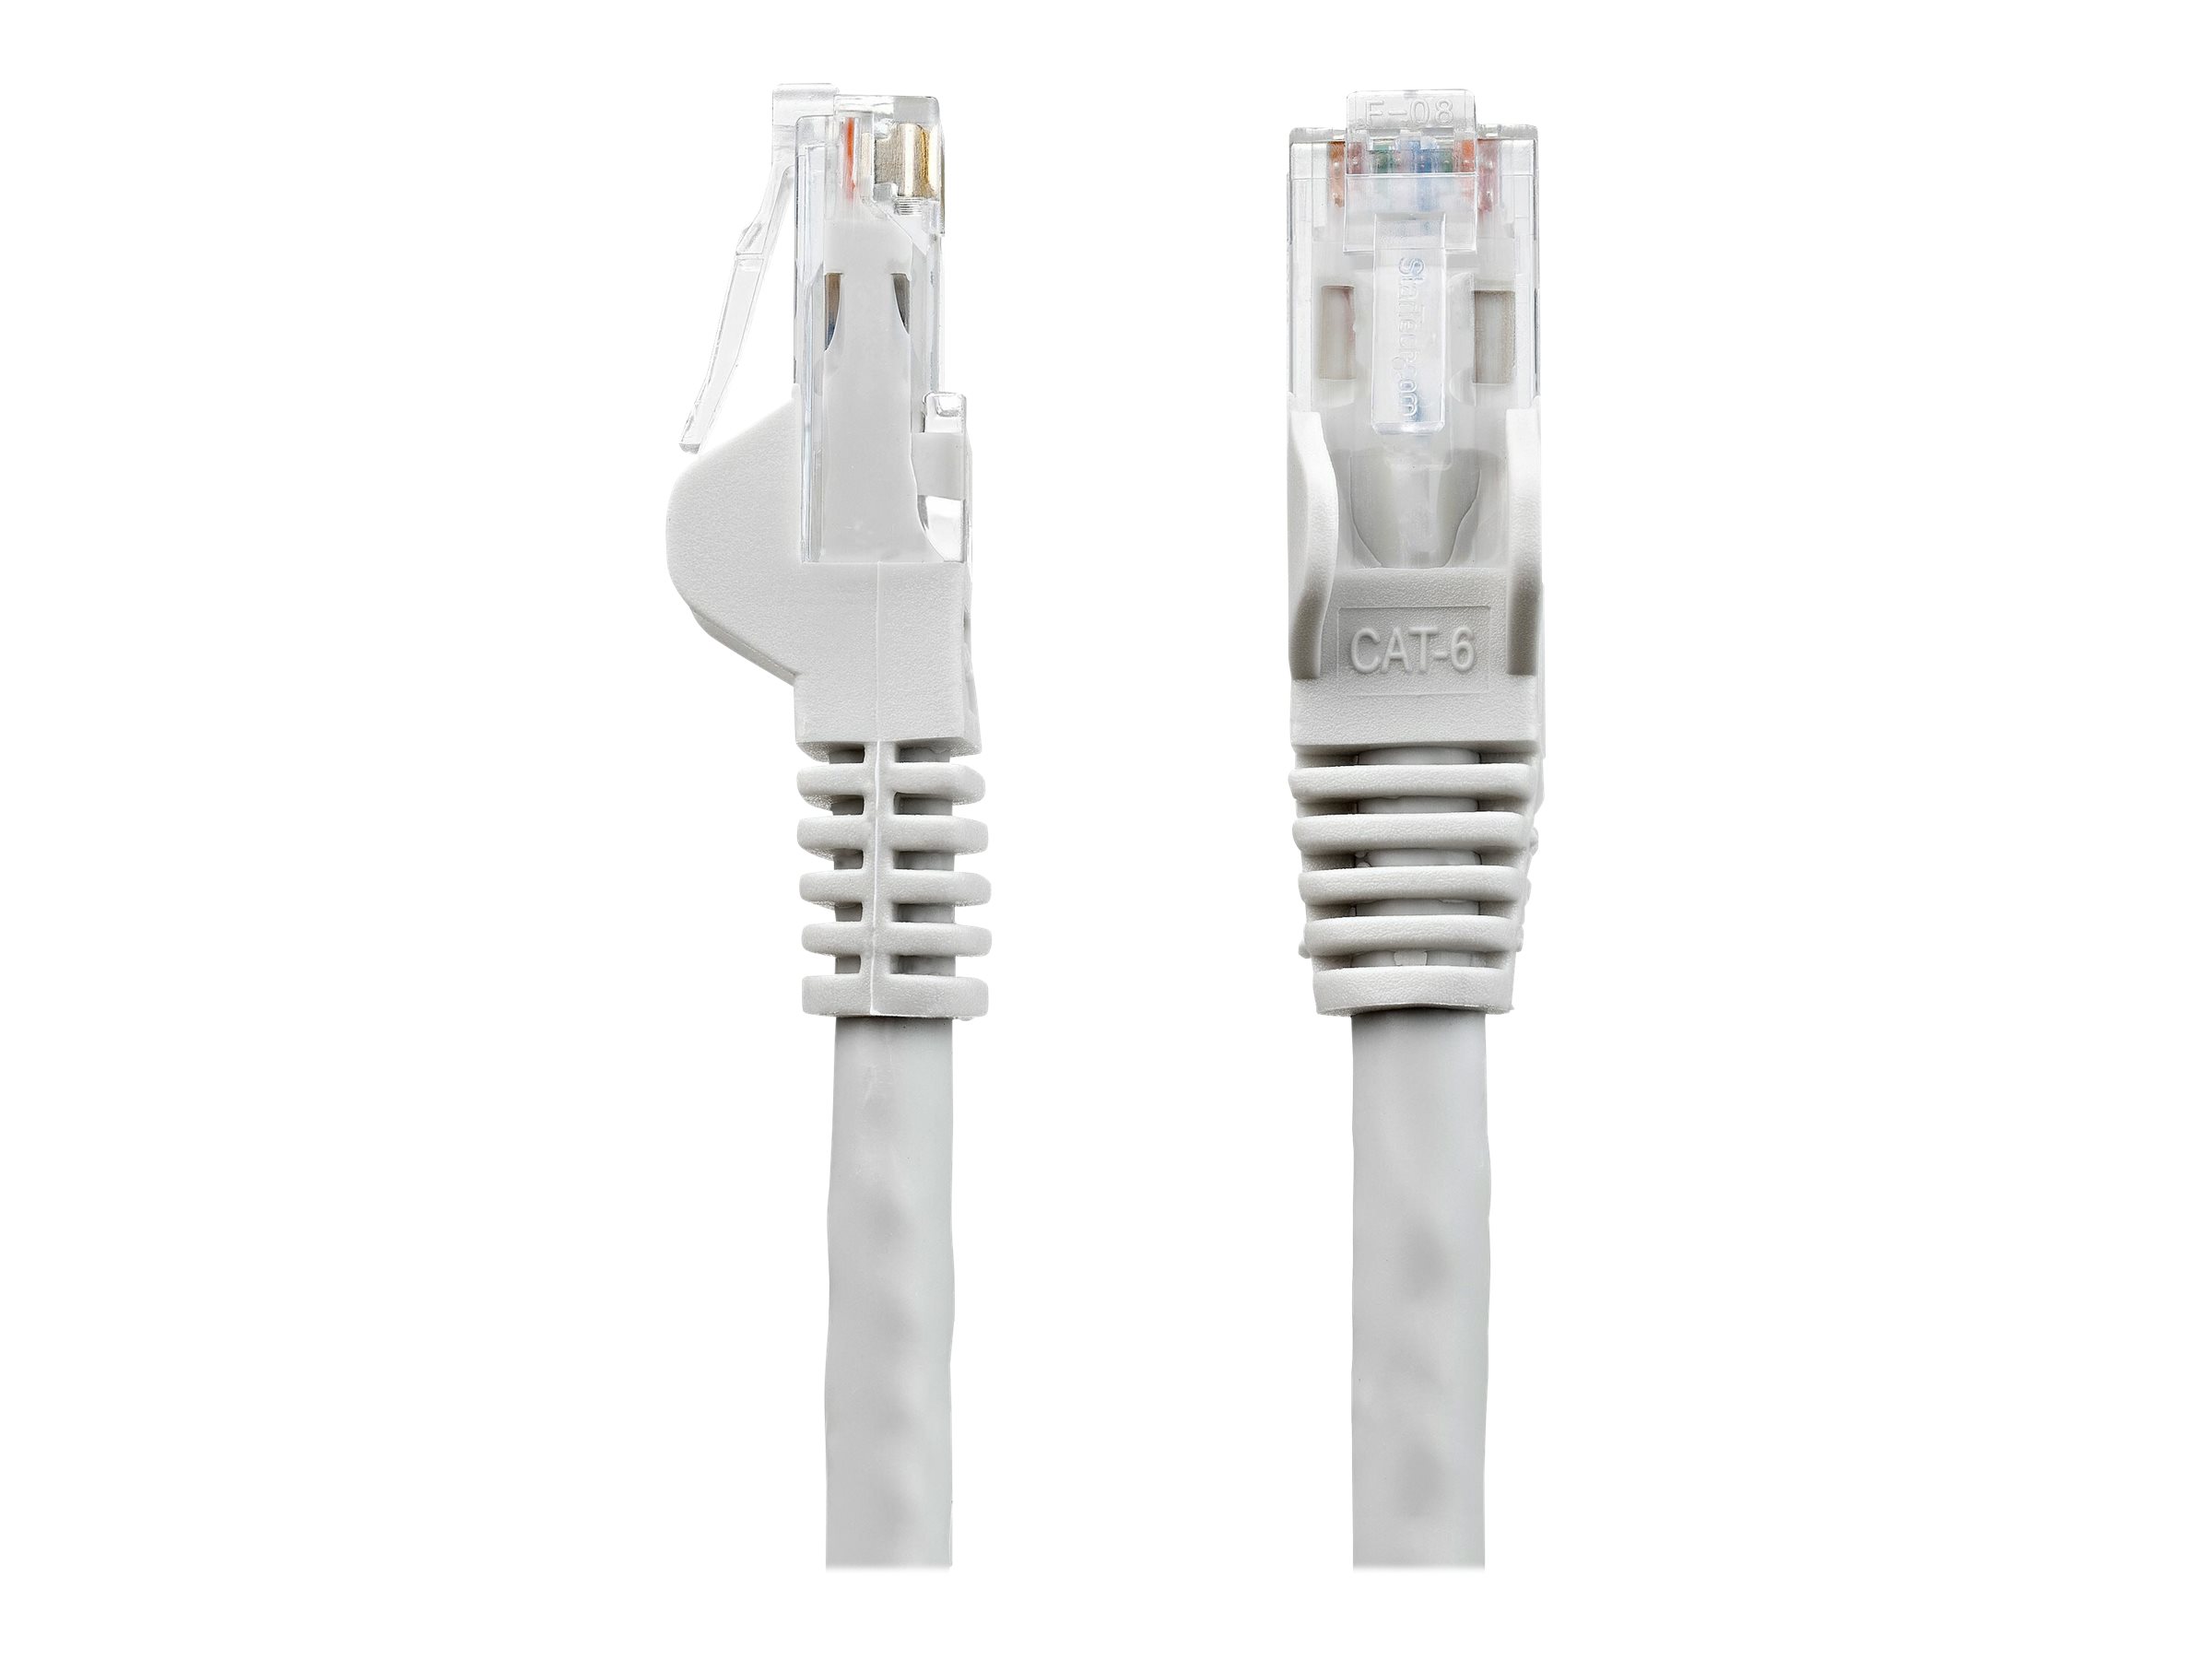 Startechcom 14Ft Cat6 Ethernet Cable 10 Gigabit Snagless Rj45 650Mhz 100W Poe Patch Cord Cat 6 10Gbe Utp Network Cable WStrain Relief Gray Fluke TestedWiring Is Ul CertifiedTia  Category 6  24Awg N6Patch14Gr  Cable De Interconexin  Rj45 M A Rj45 M  43 M  Utp  Cat 6  Moldeado Sin Enganches  Gris - N6PATCH14GR